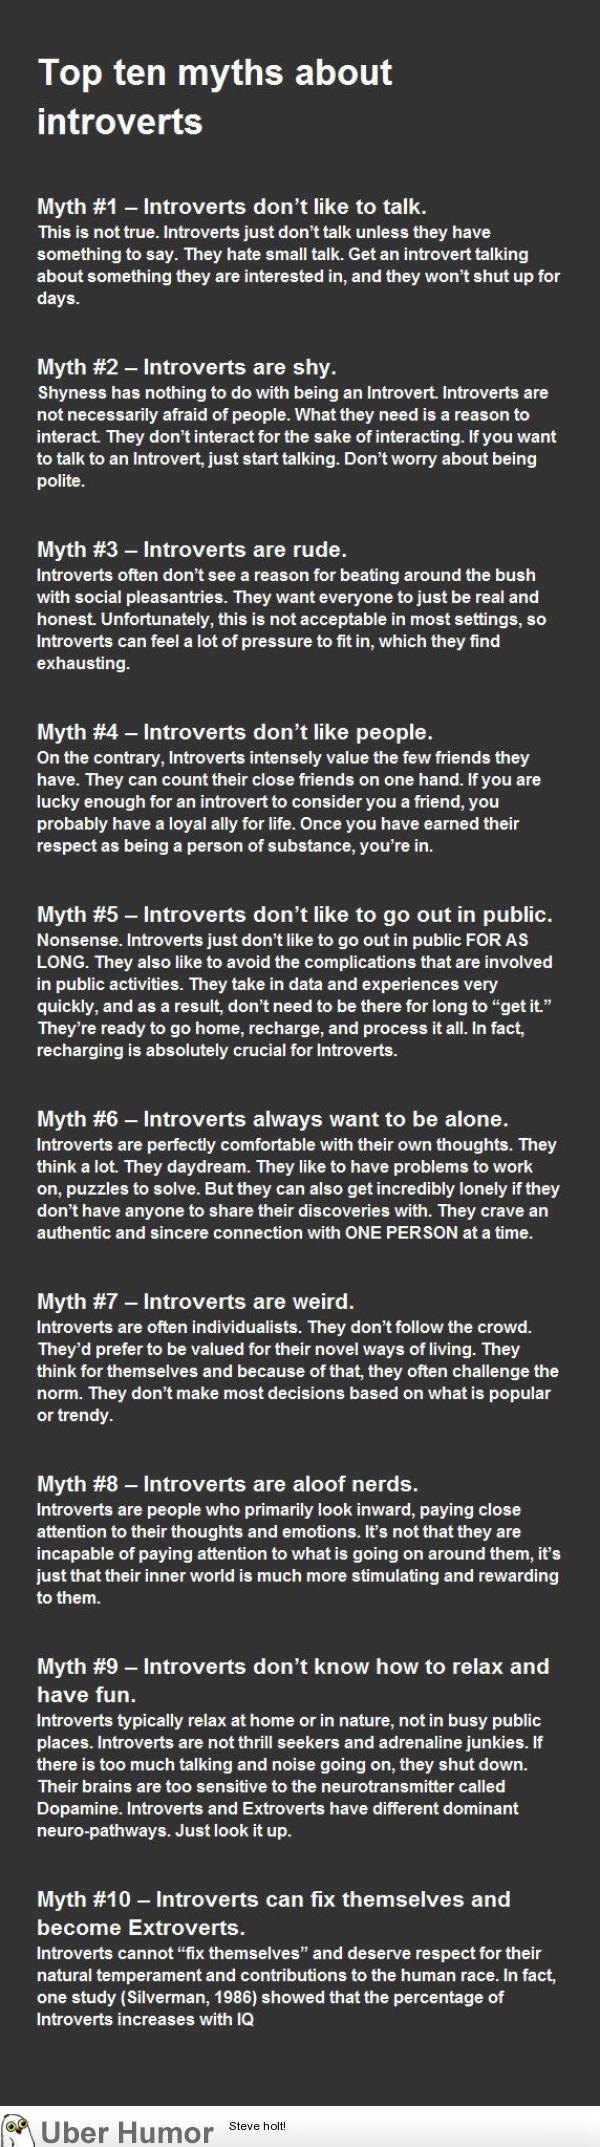 Top 10 Myths About Introverts | Funny Pictures, Quotes, Pics, Photos ...